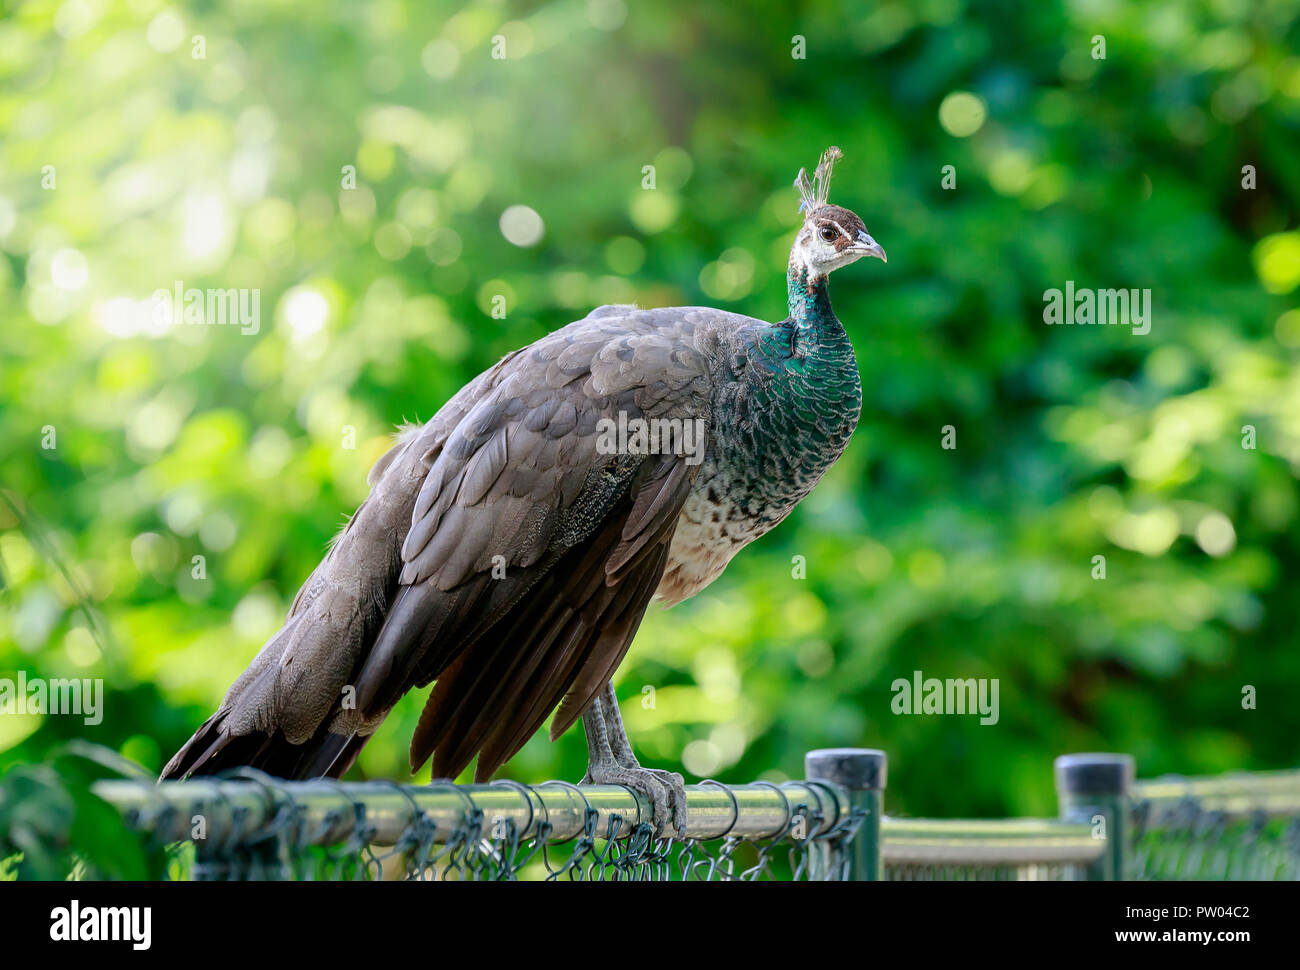 Closeup of a beautiful female, Indian peafowl or blue peafowl Pavo cristatus  peahen bird, perched on a fence in a green forest with bright sunlight a Stock Photo